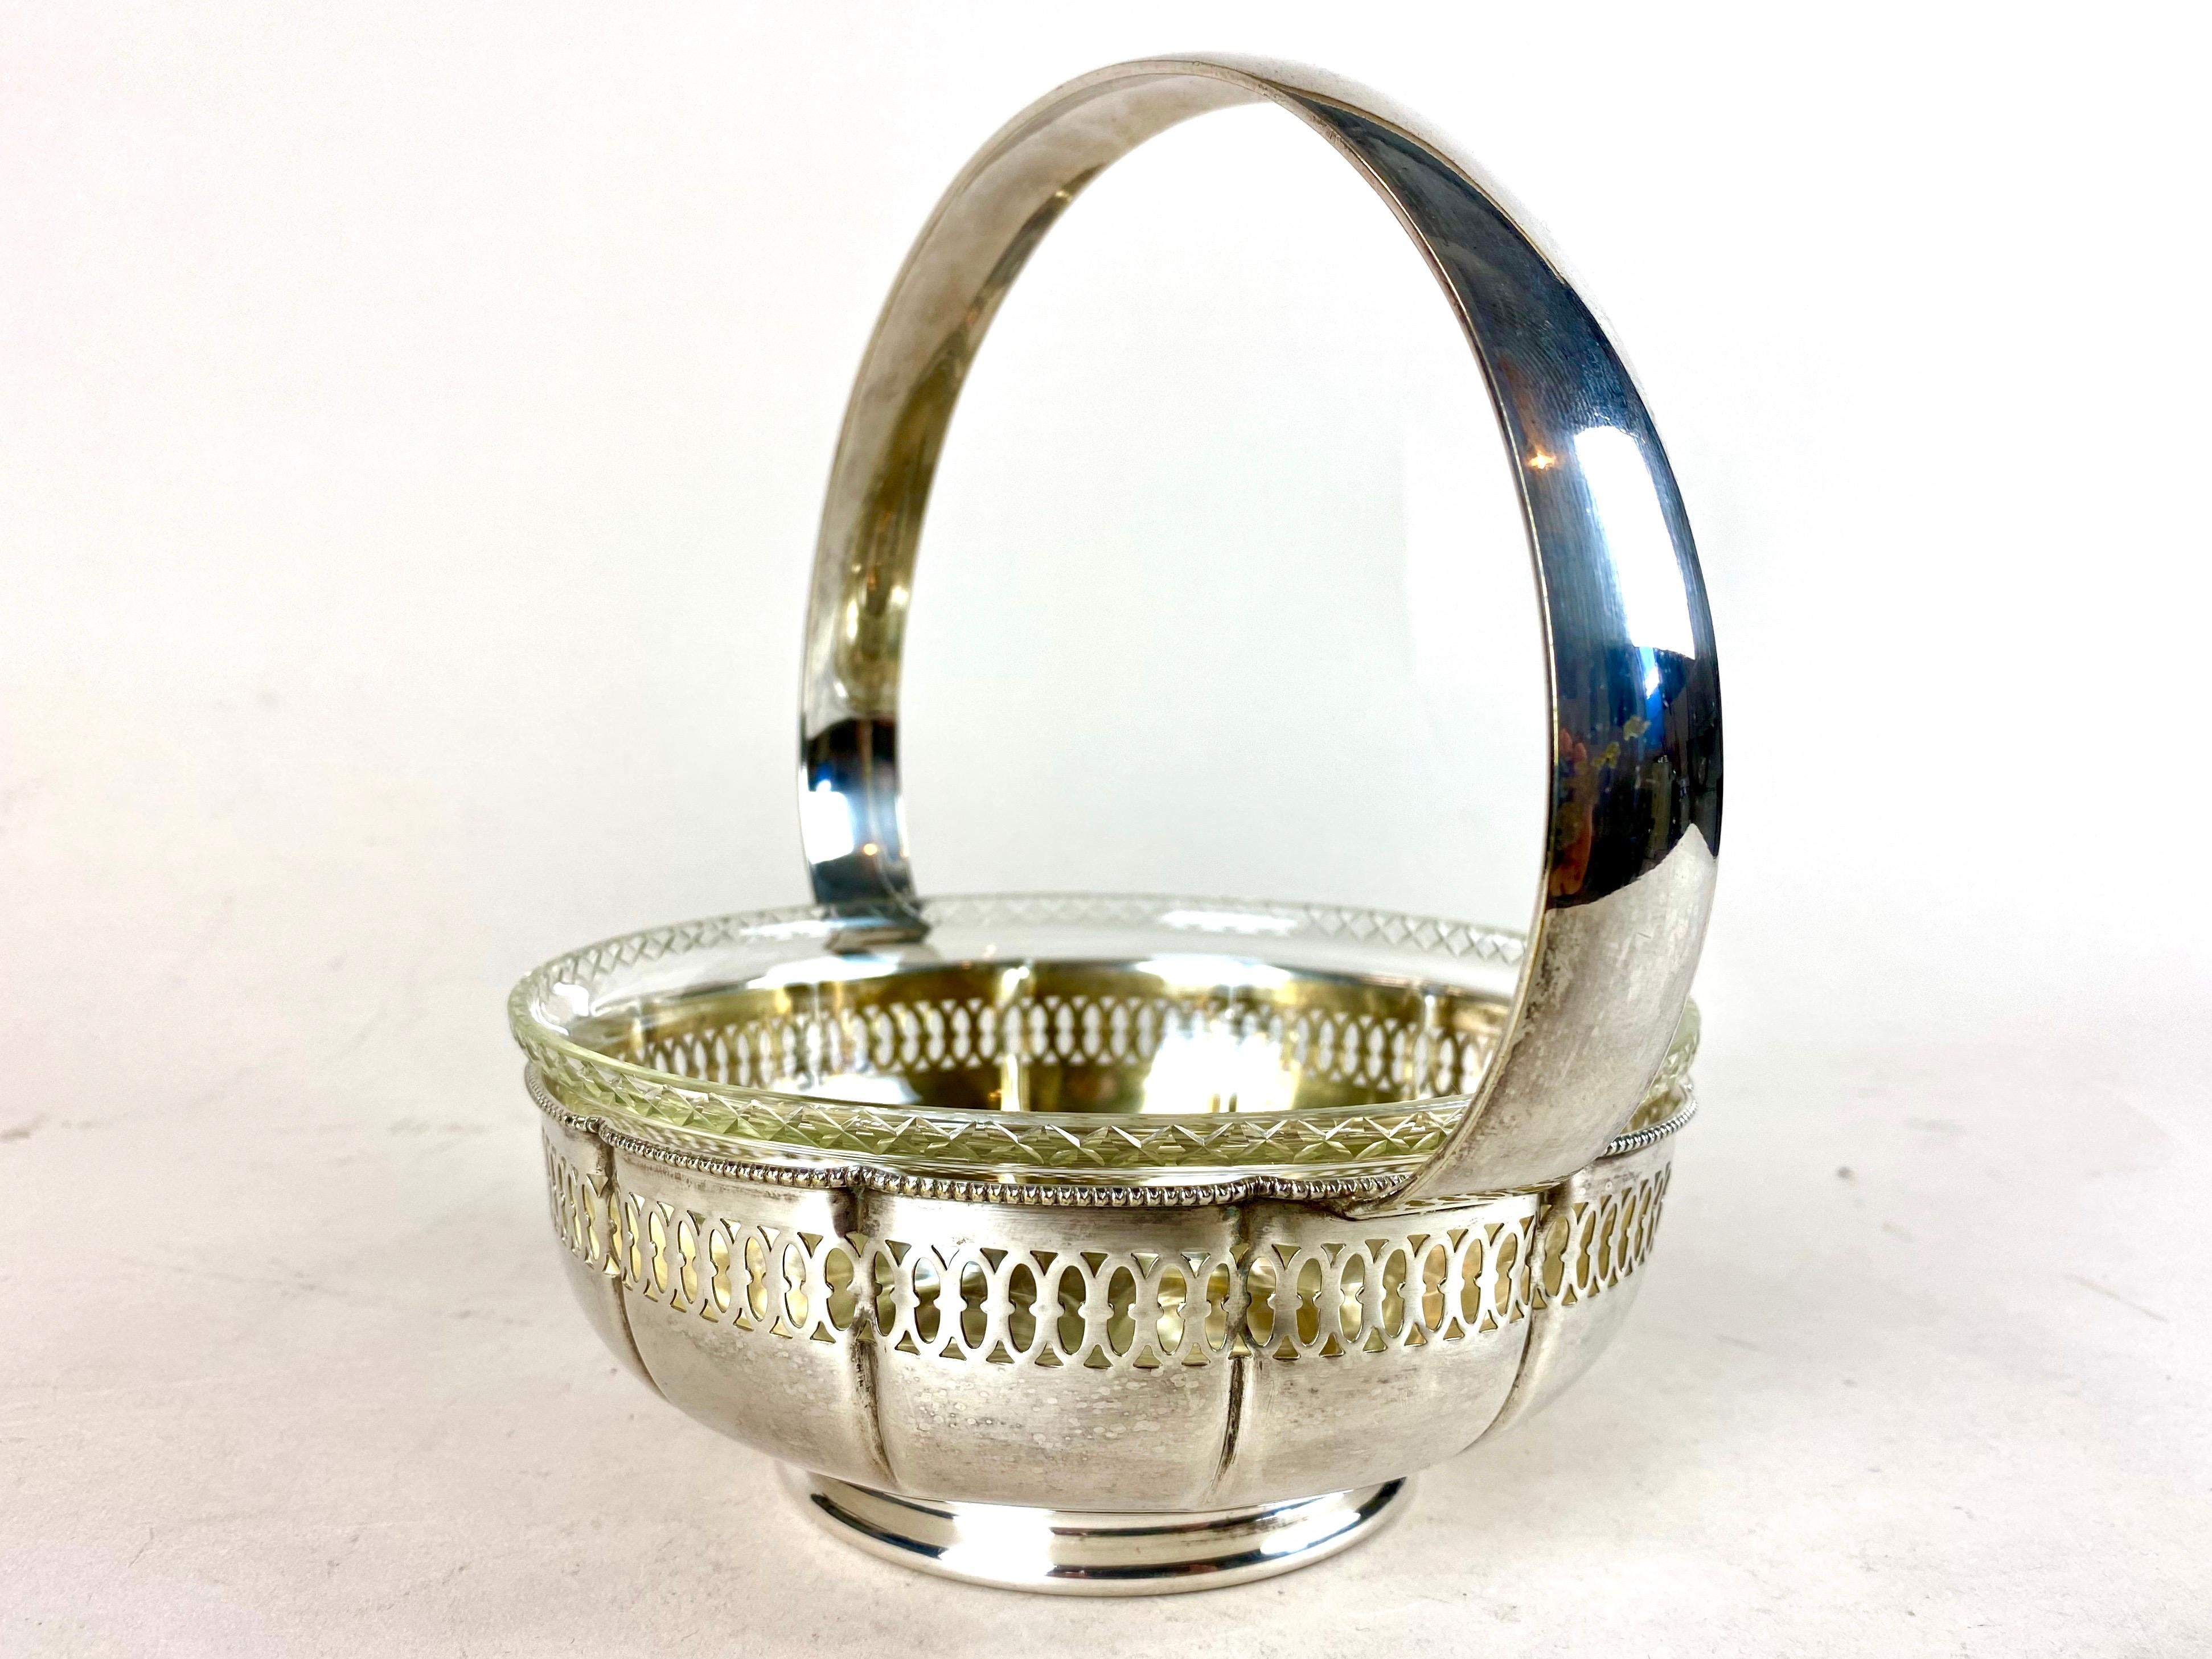 Charming Art Nouveau silvered brass basket/ centerpiece with beautiful glass bowl from the period in Austria around 1910. The silvered, artfully shaped basket impresses with an open worked design and a large. Inside sits a beautiful worked,